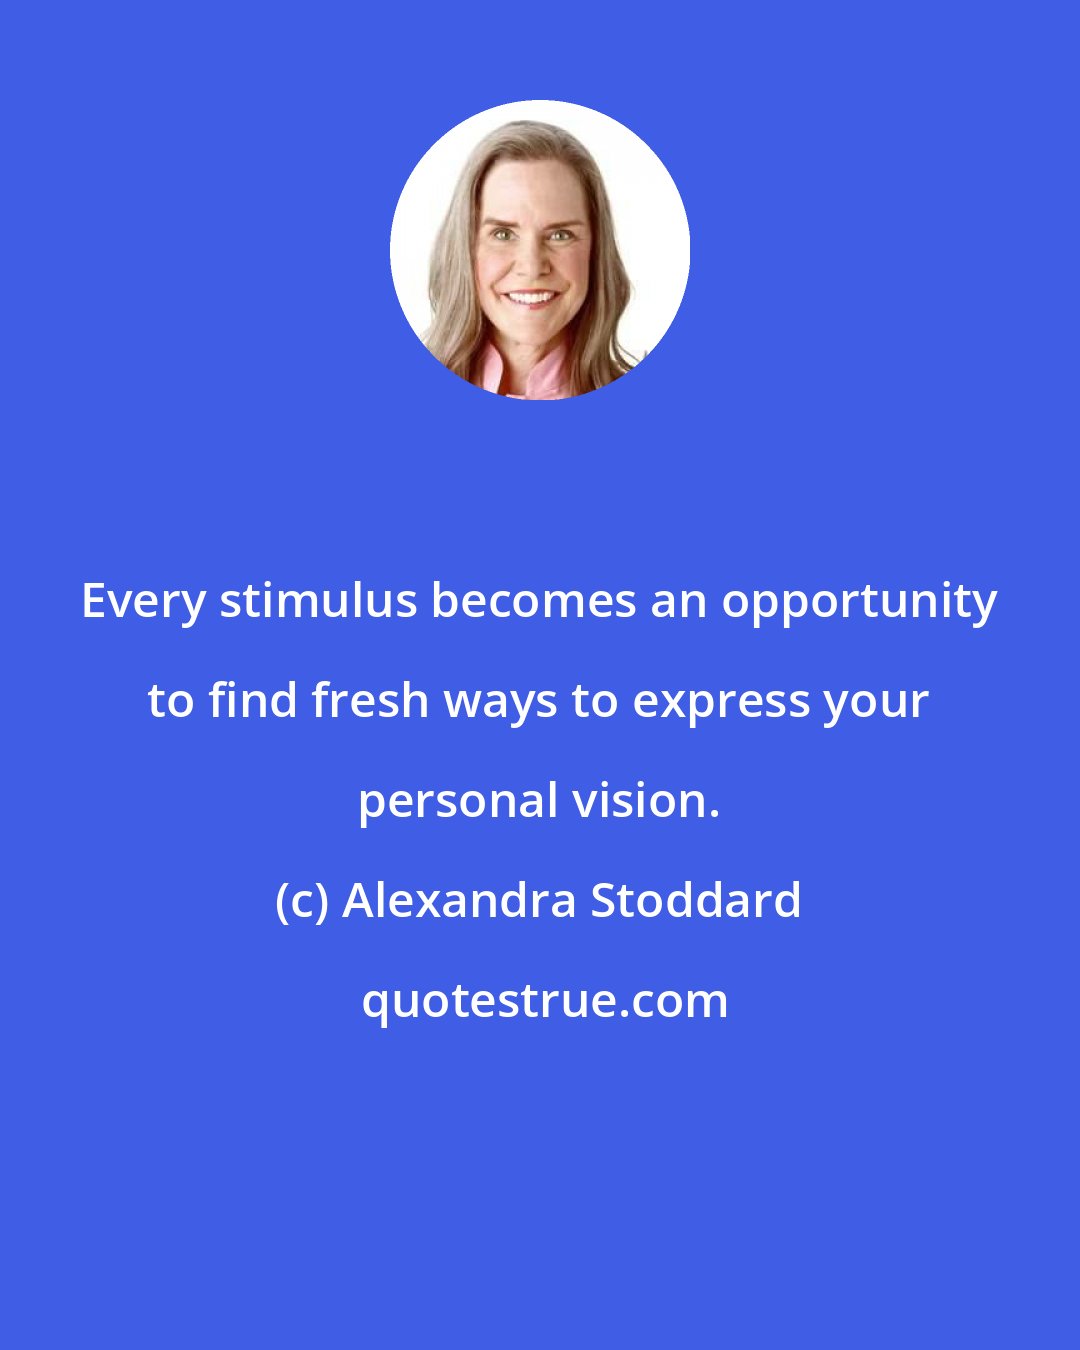 Alexandra Stoddard: Every stimulus becomes an opportunity to find fresh ways to express your personal vision.